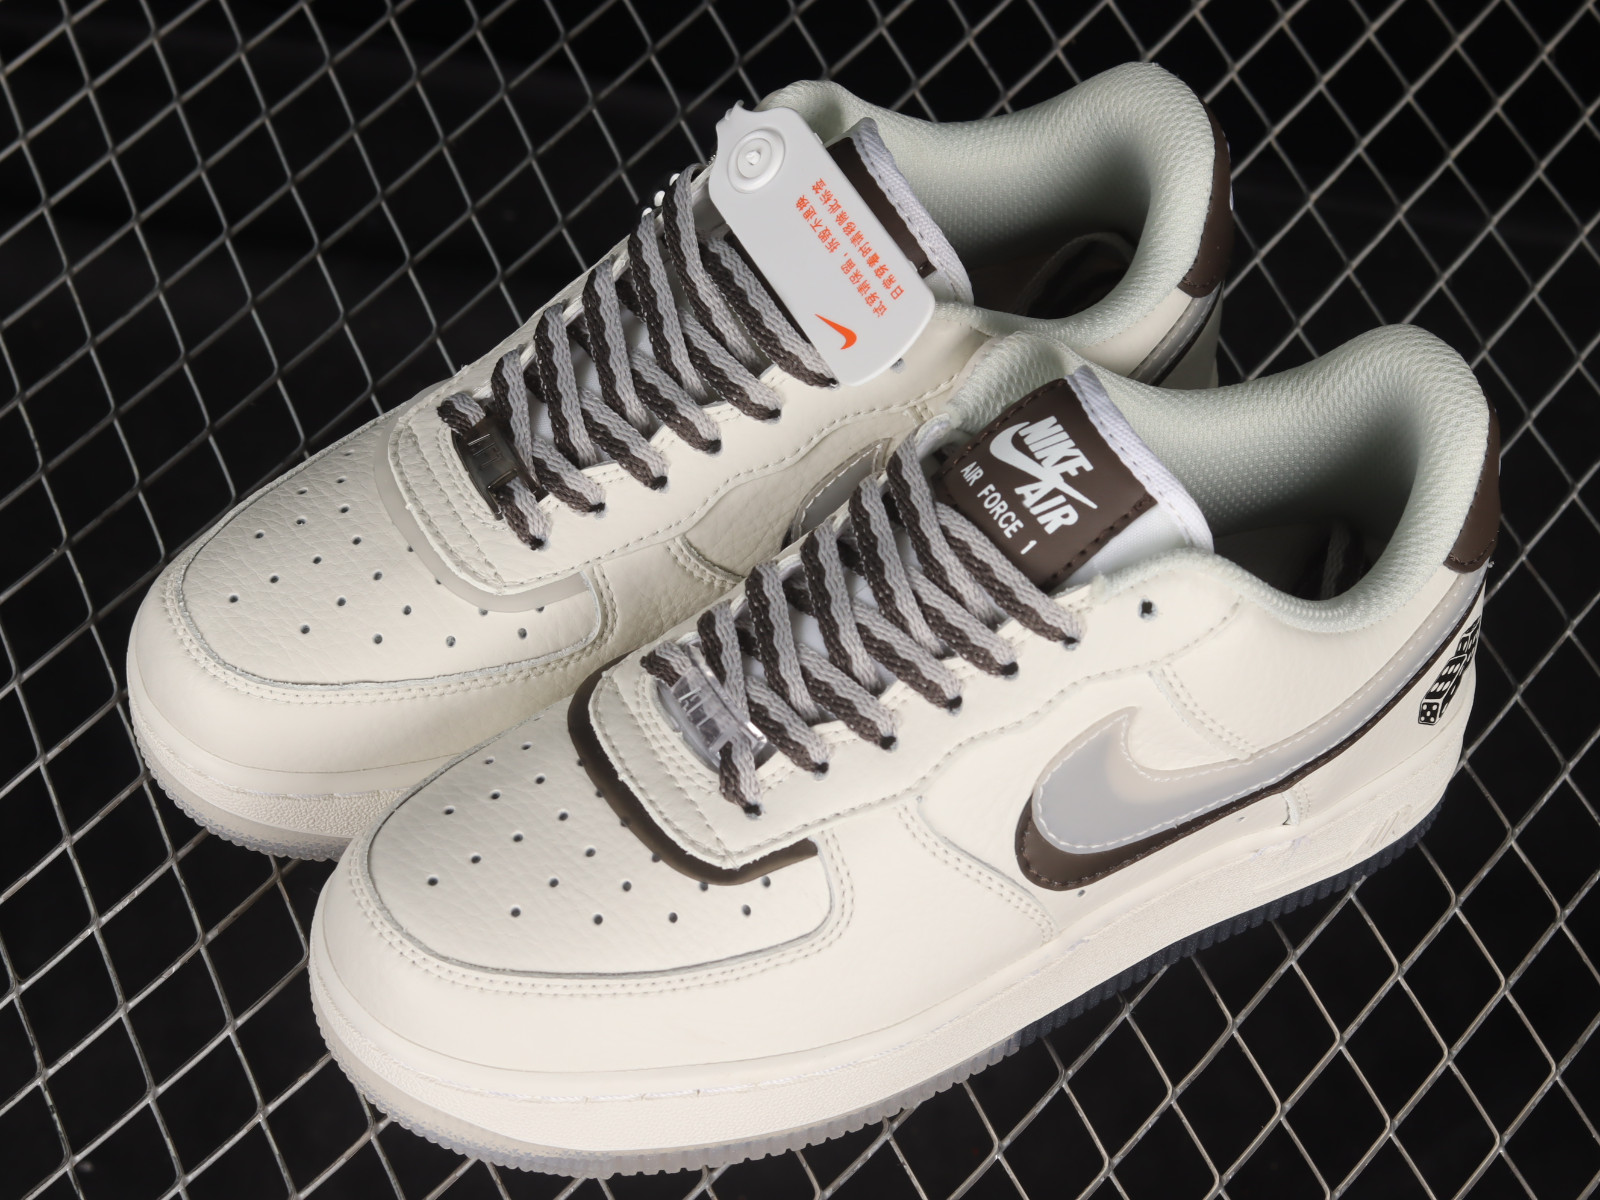 801 - Nike Air Force 1 07 Low Dice God Cream Brown Grey CW1574 - MultiscaleconsultingShops - Air Nfs Preto